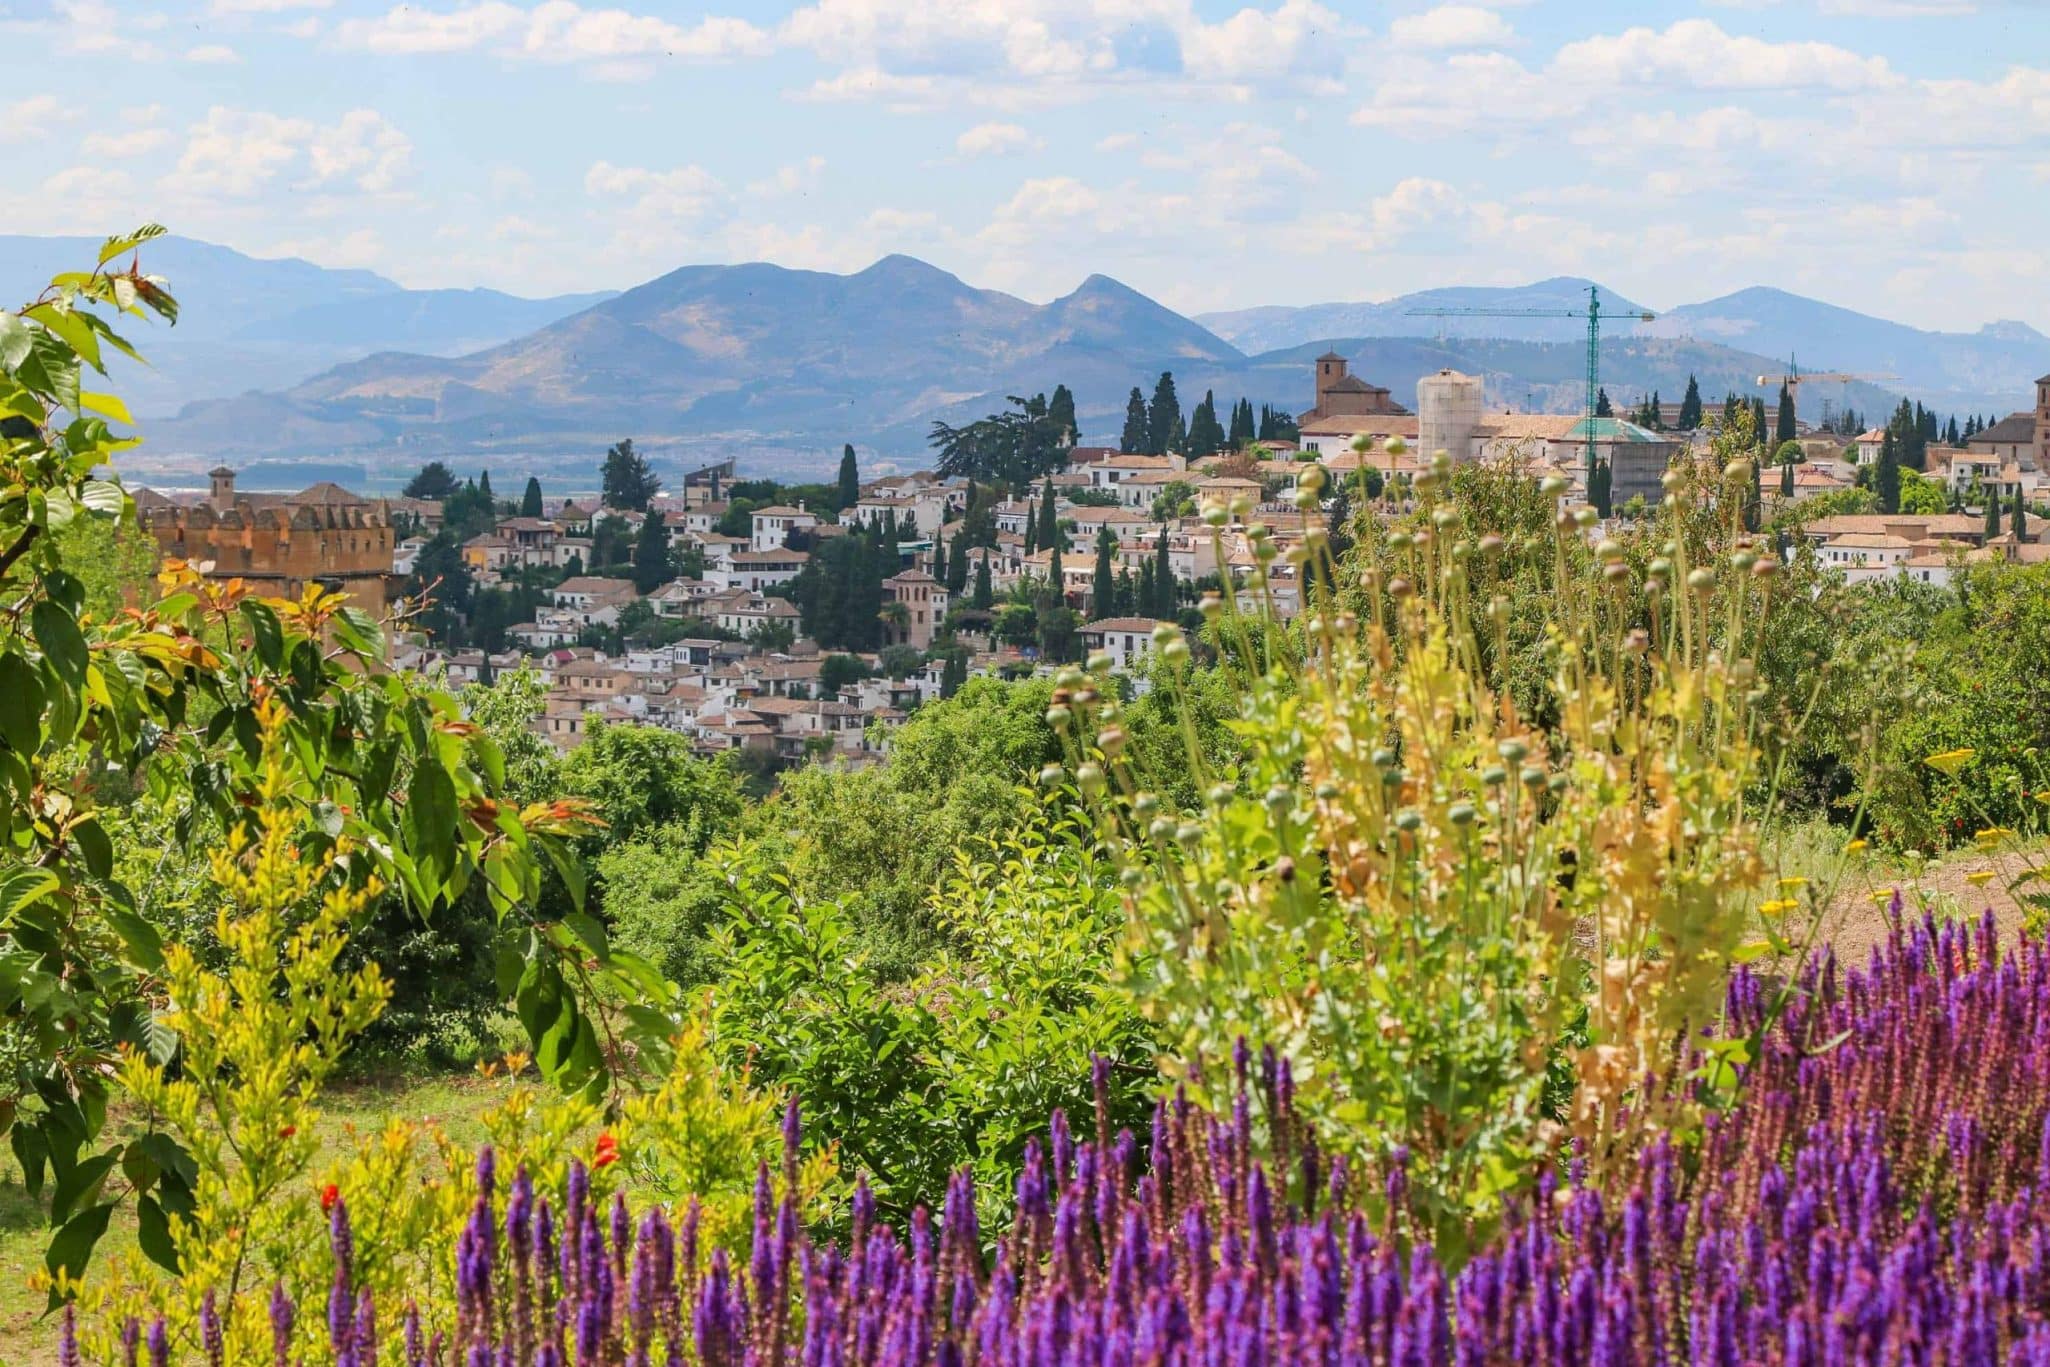 10 amazing things to do in Granada Spain – besides the Alhambra